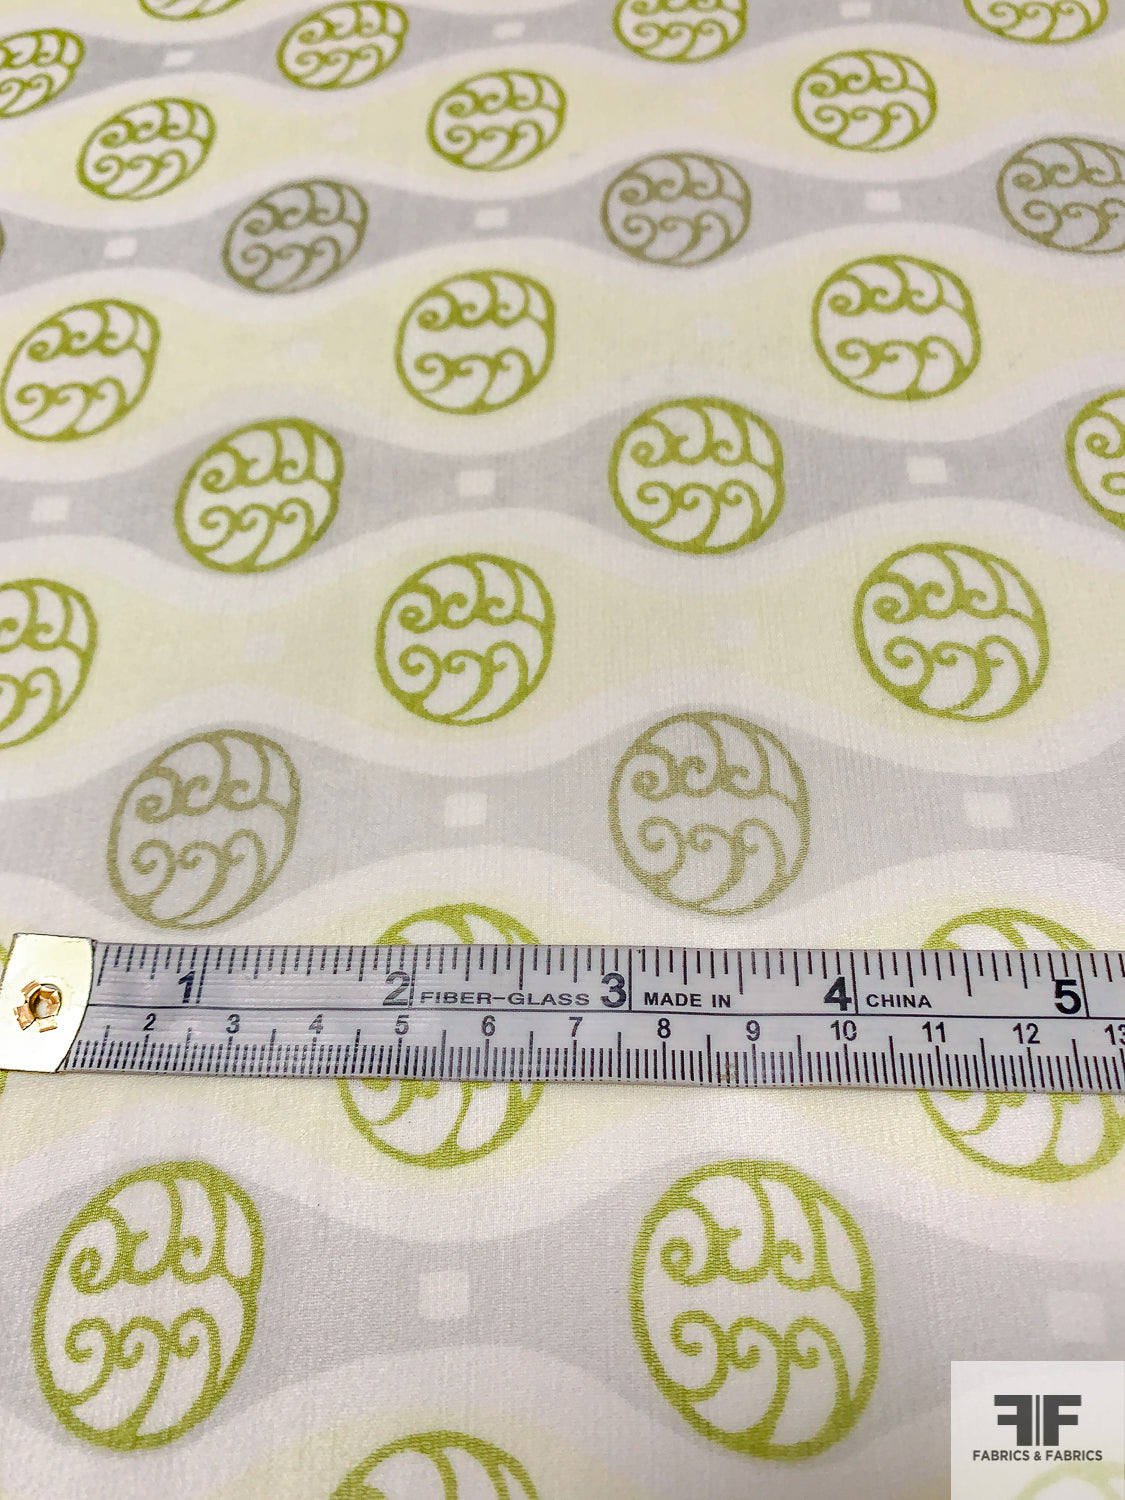 Gnarled Circles in Wavy Lines Printed Silk Chiffon - Lime Green / Olive / Light Grey / Yellow